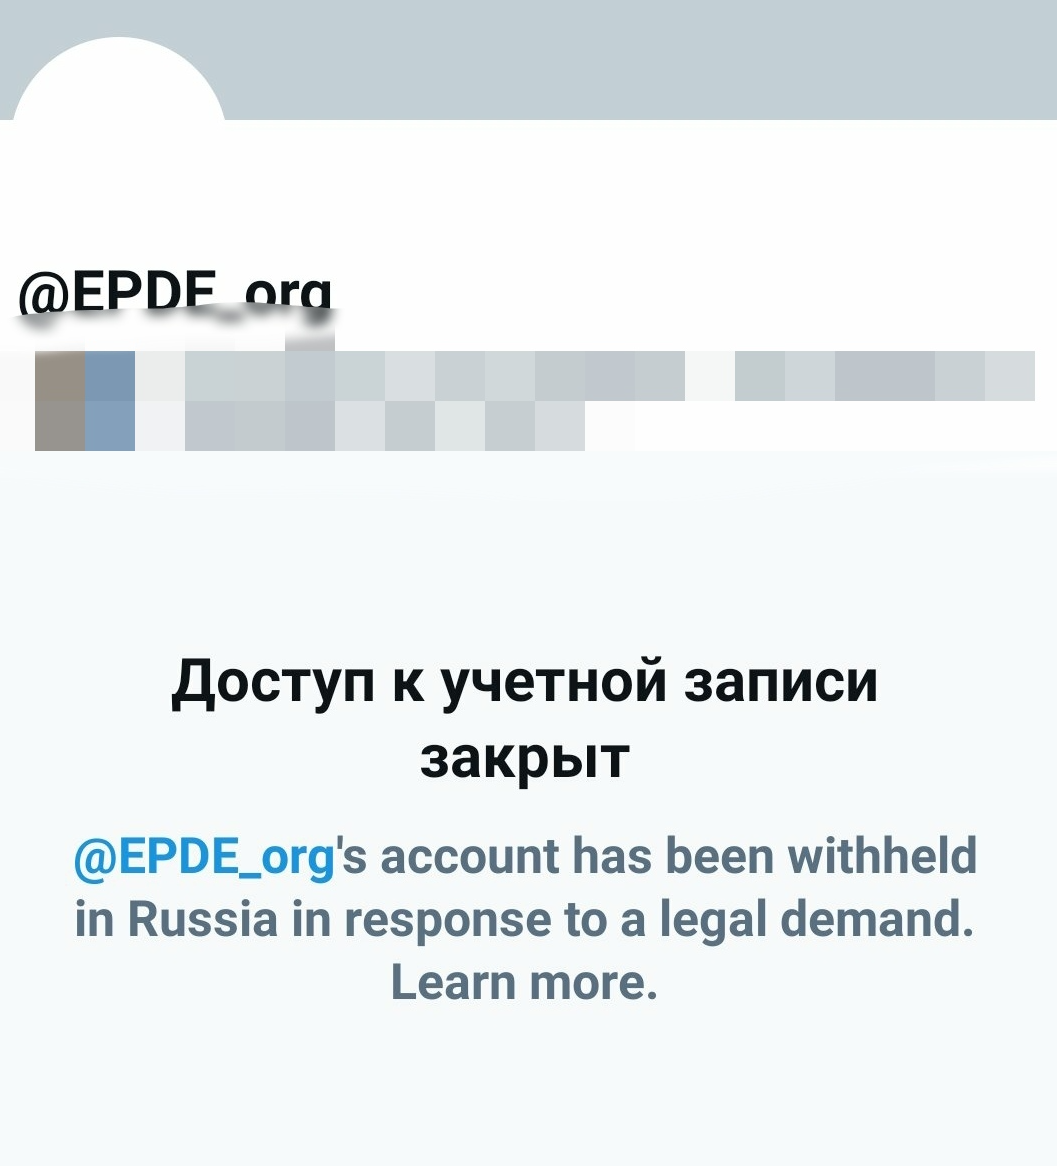 EPDE Twitter blocked – freedom of expression further restricted ahead of State Duma elections